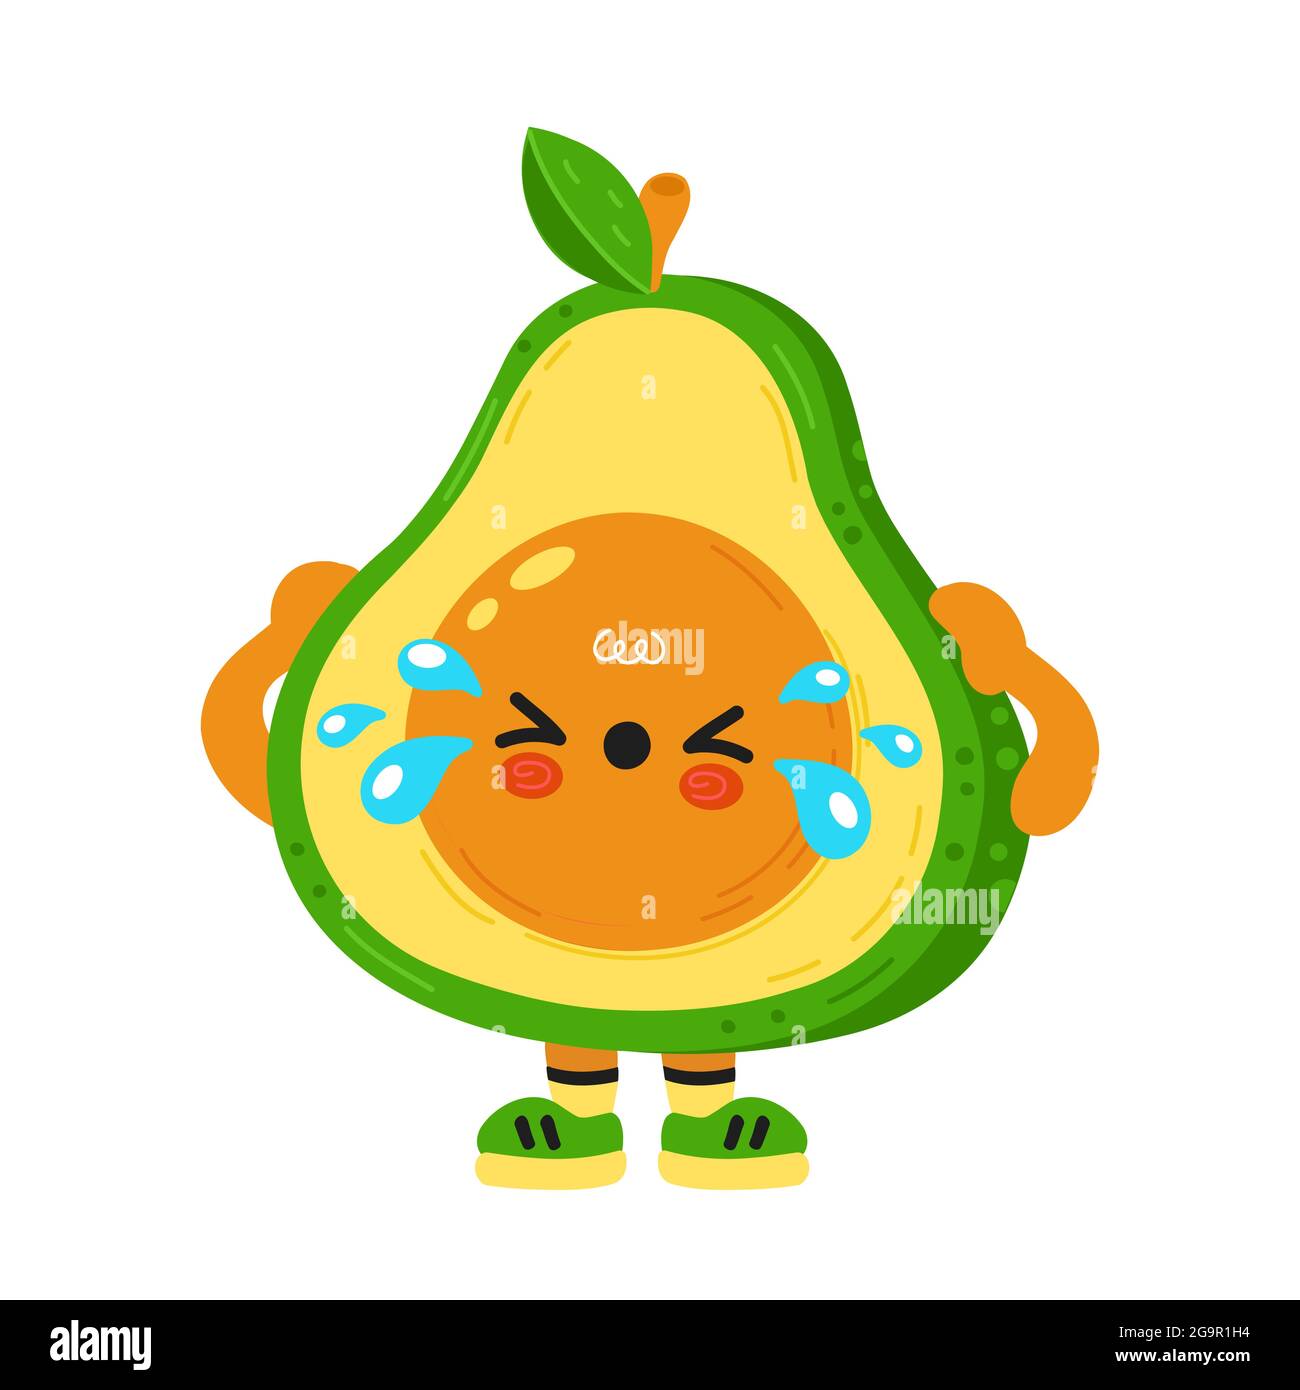 suffer, failure, allergy, hungry, sick, depression, lose, expression, angry, sad, vector, cartoon, cry, character, illustration, stress, fun, seed, white, design, icon, avocado, baby, background, core, cut, cute, diet, doodle, emoji, exotic, face, food, fruit, funny, green, half, hand drawn, health, healthy, isolated, joyful, kawaii, keto, mascot, nutrition, tropical, vegan, vegetable, vegetarian Stock Vector